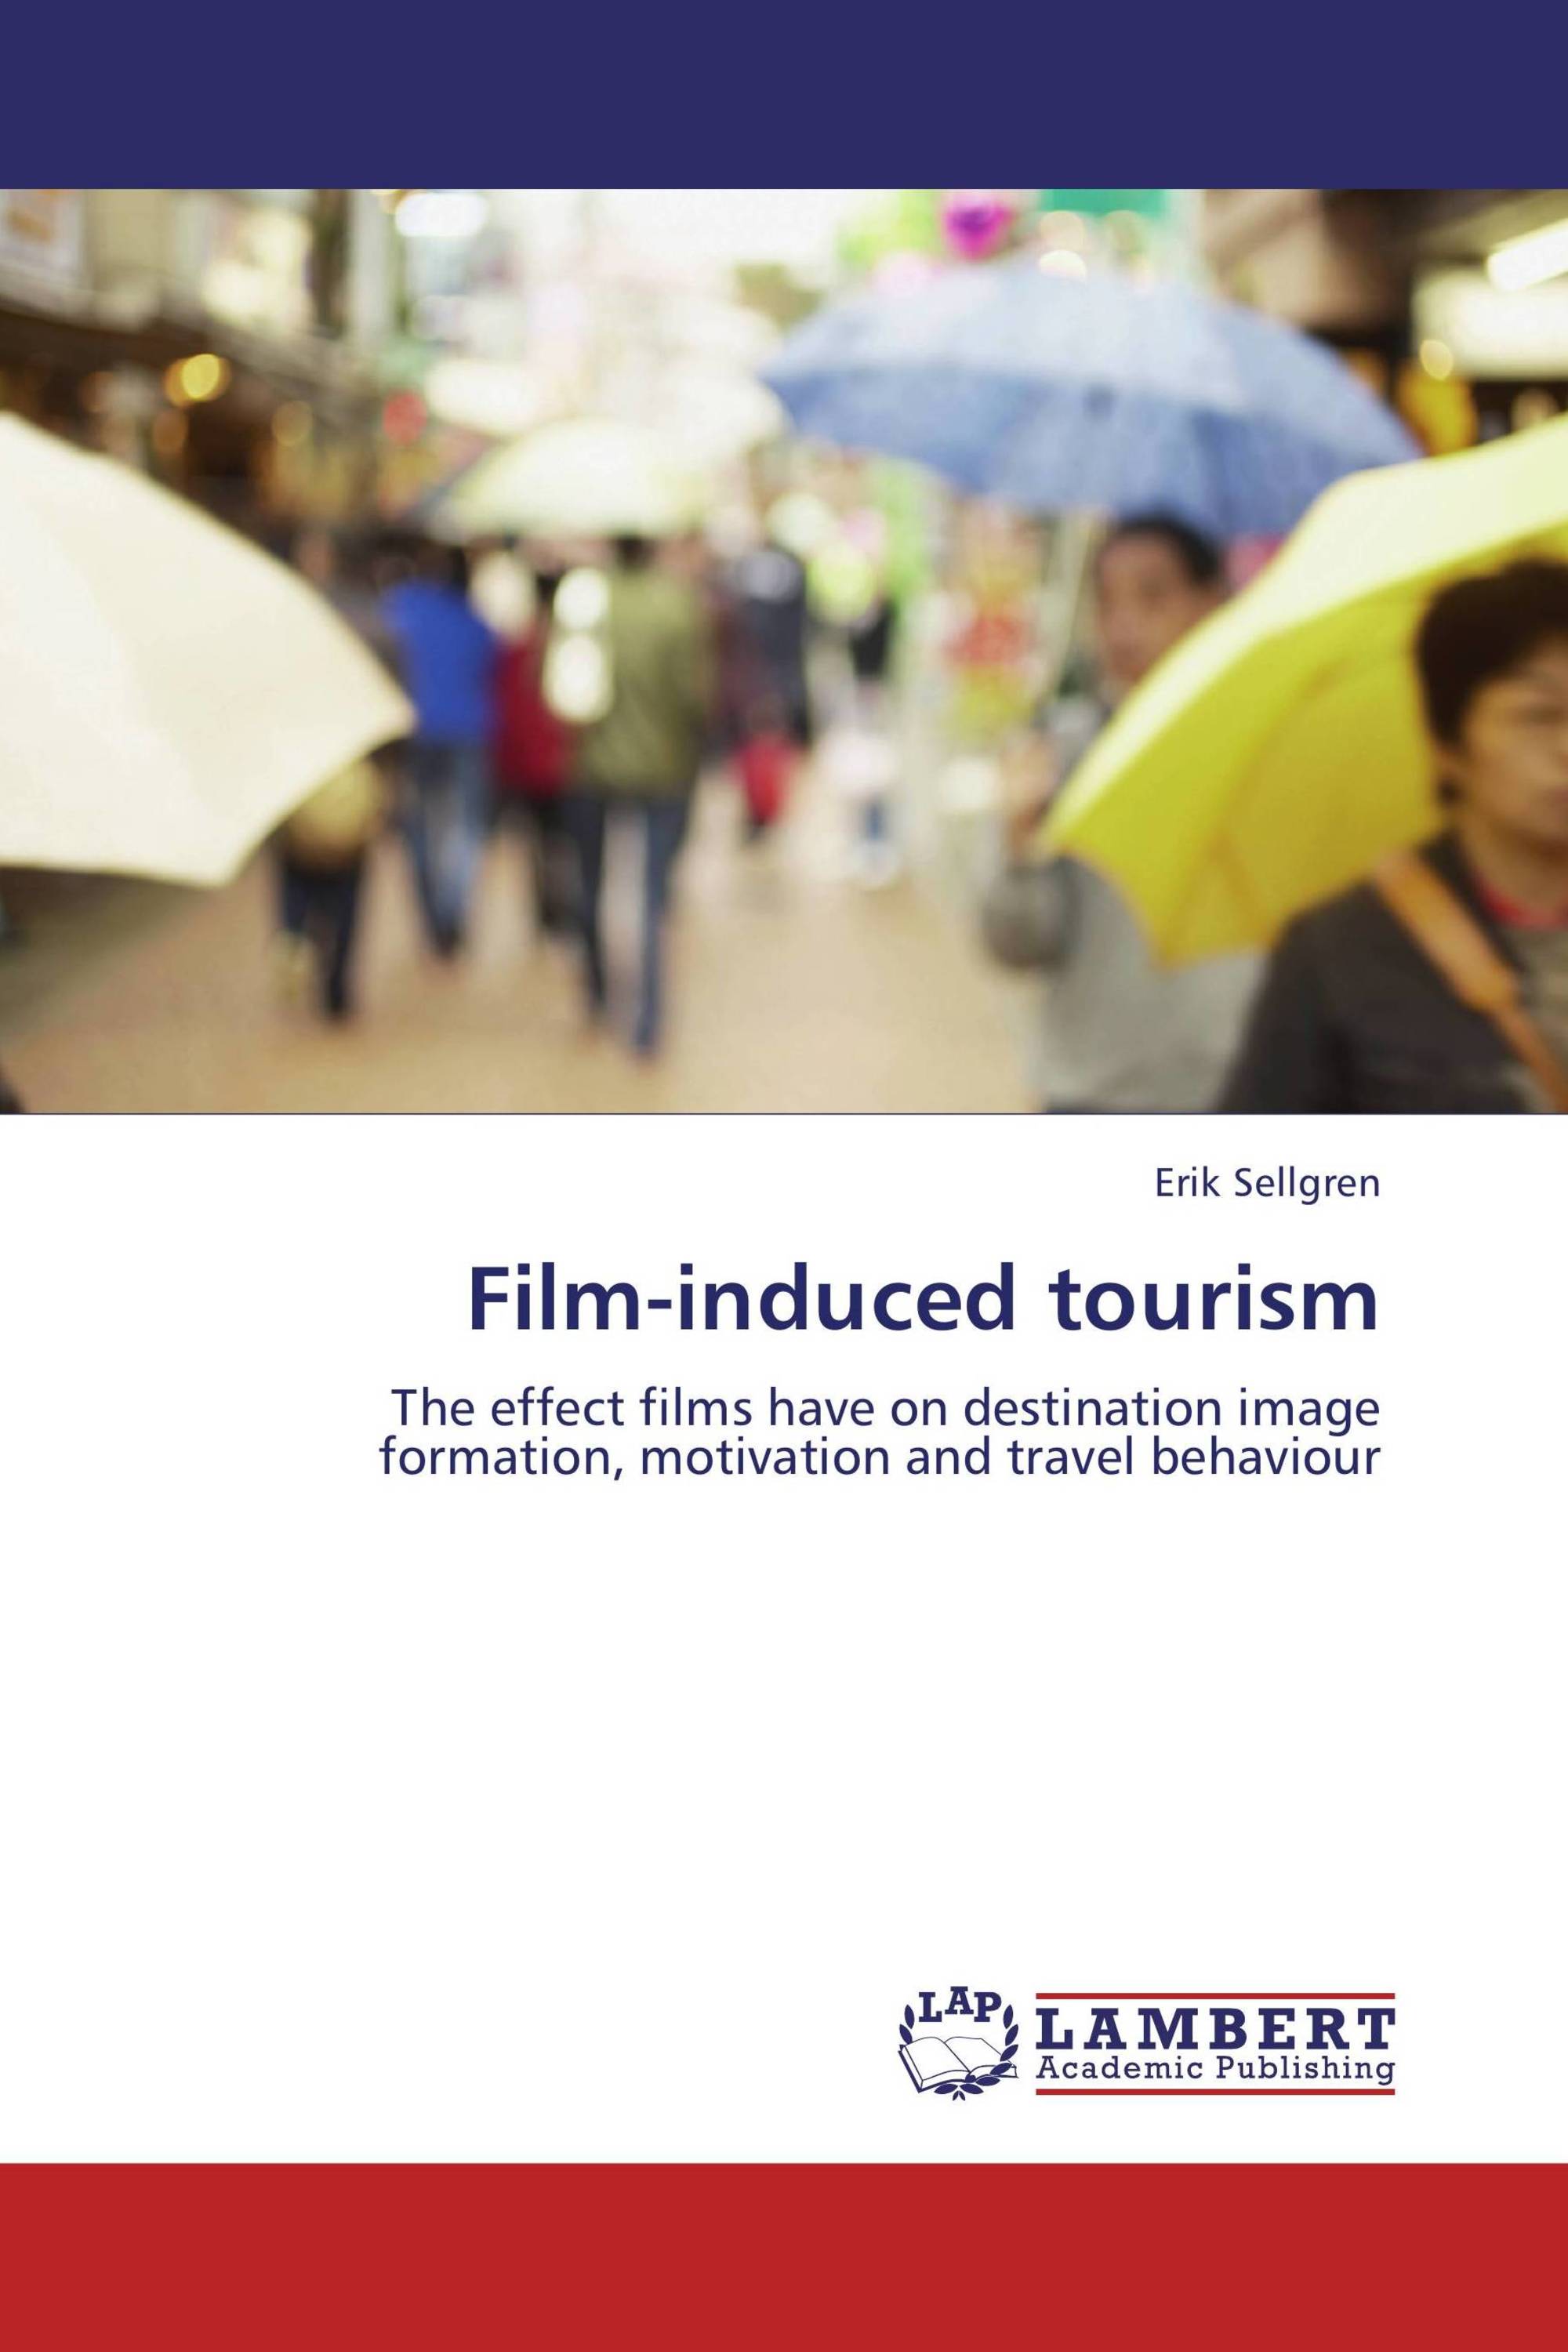 growth of film induced tourism